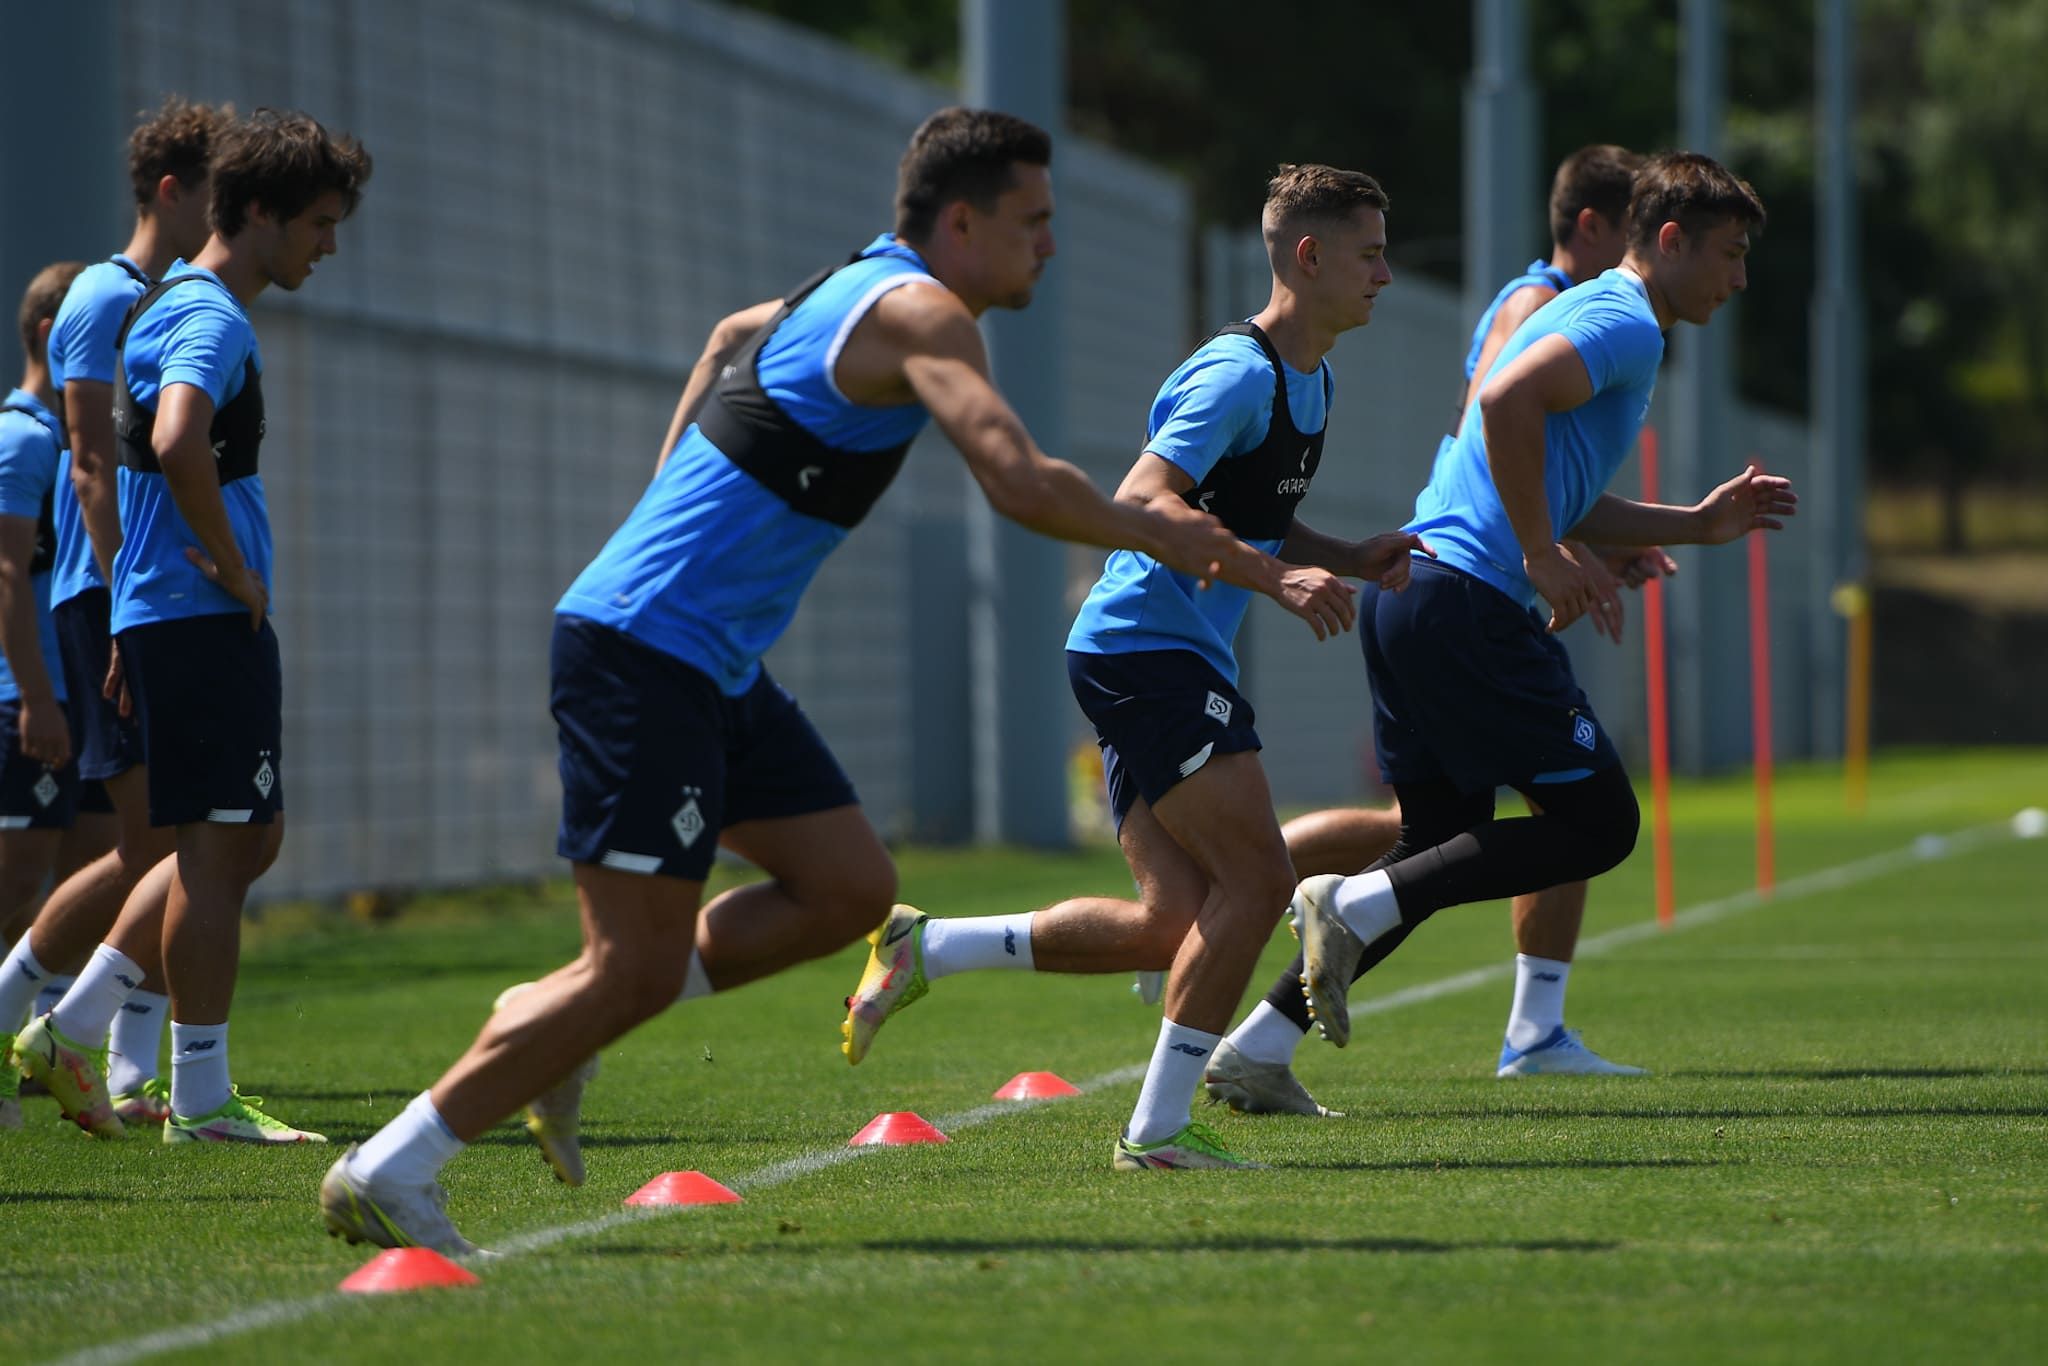 Working at club training ground: preparations for new season under way